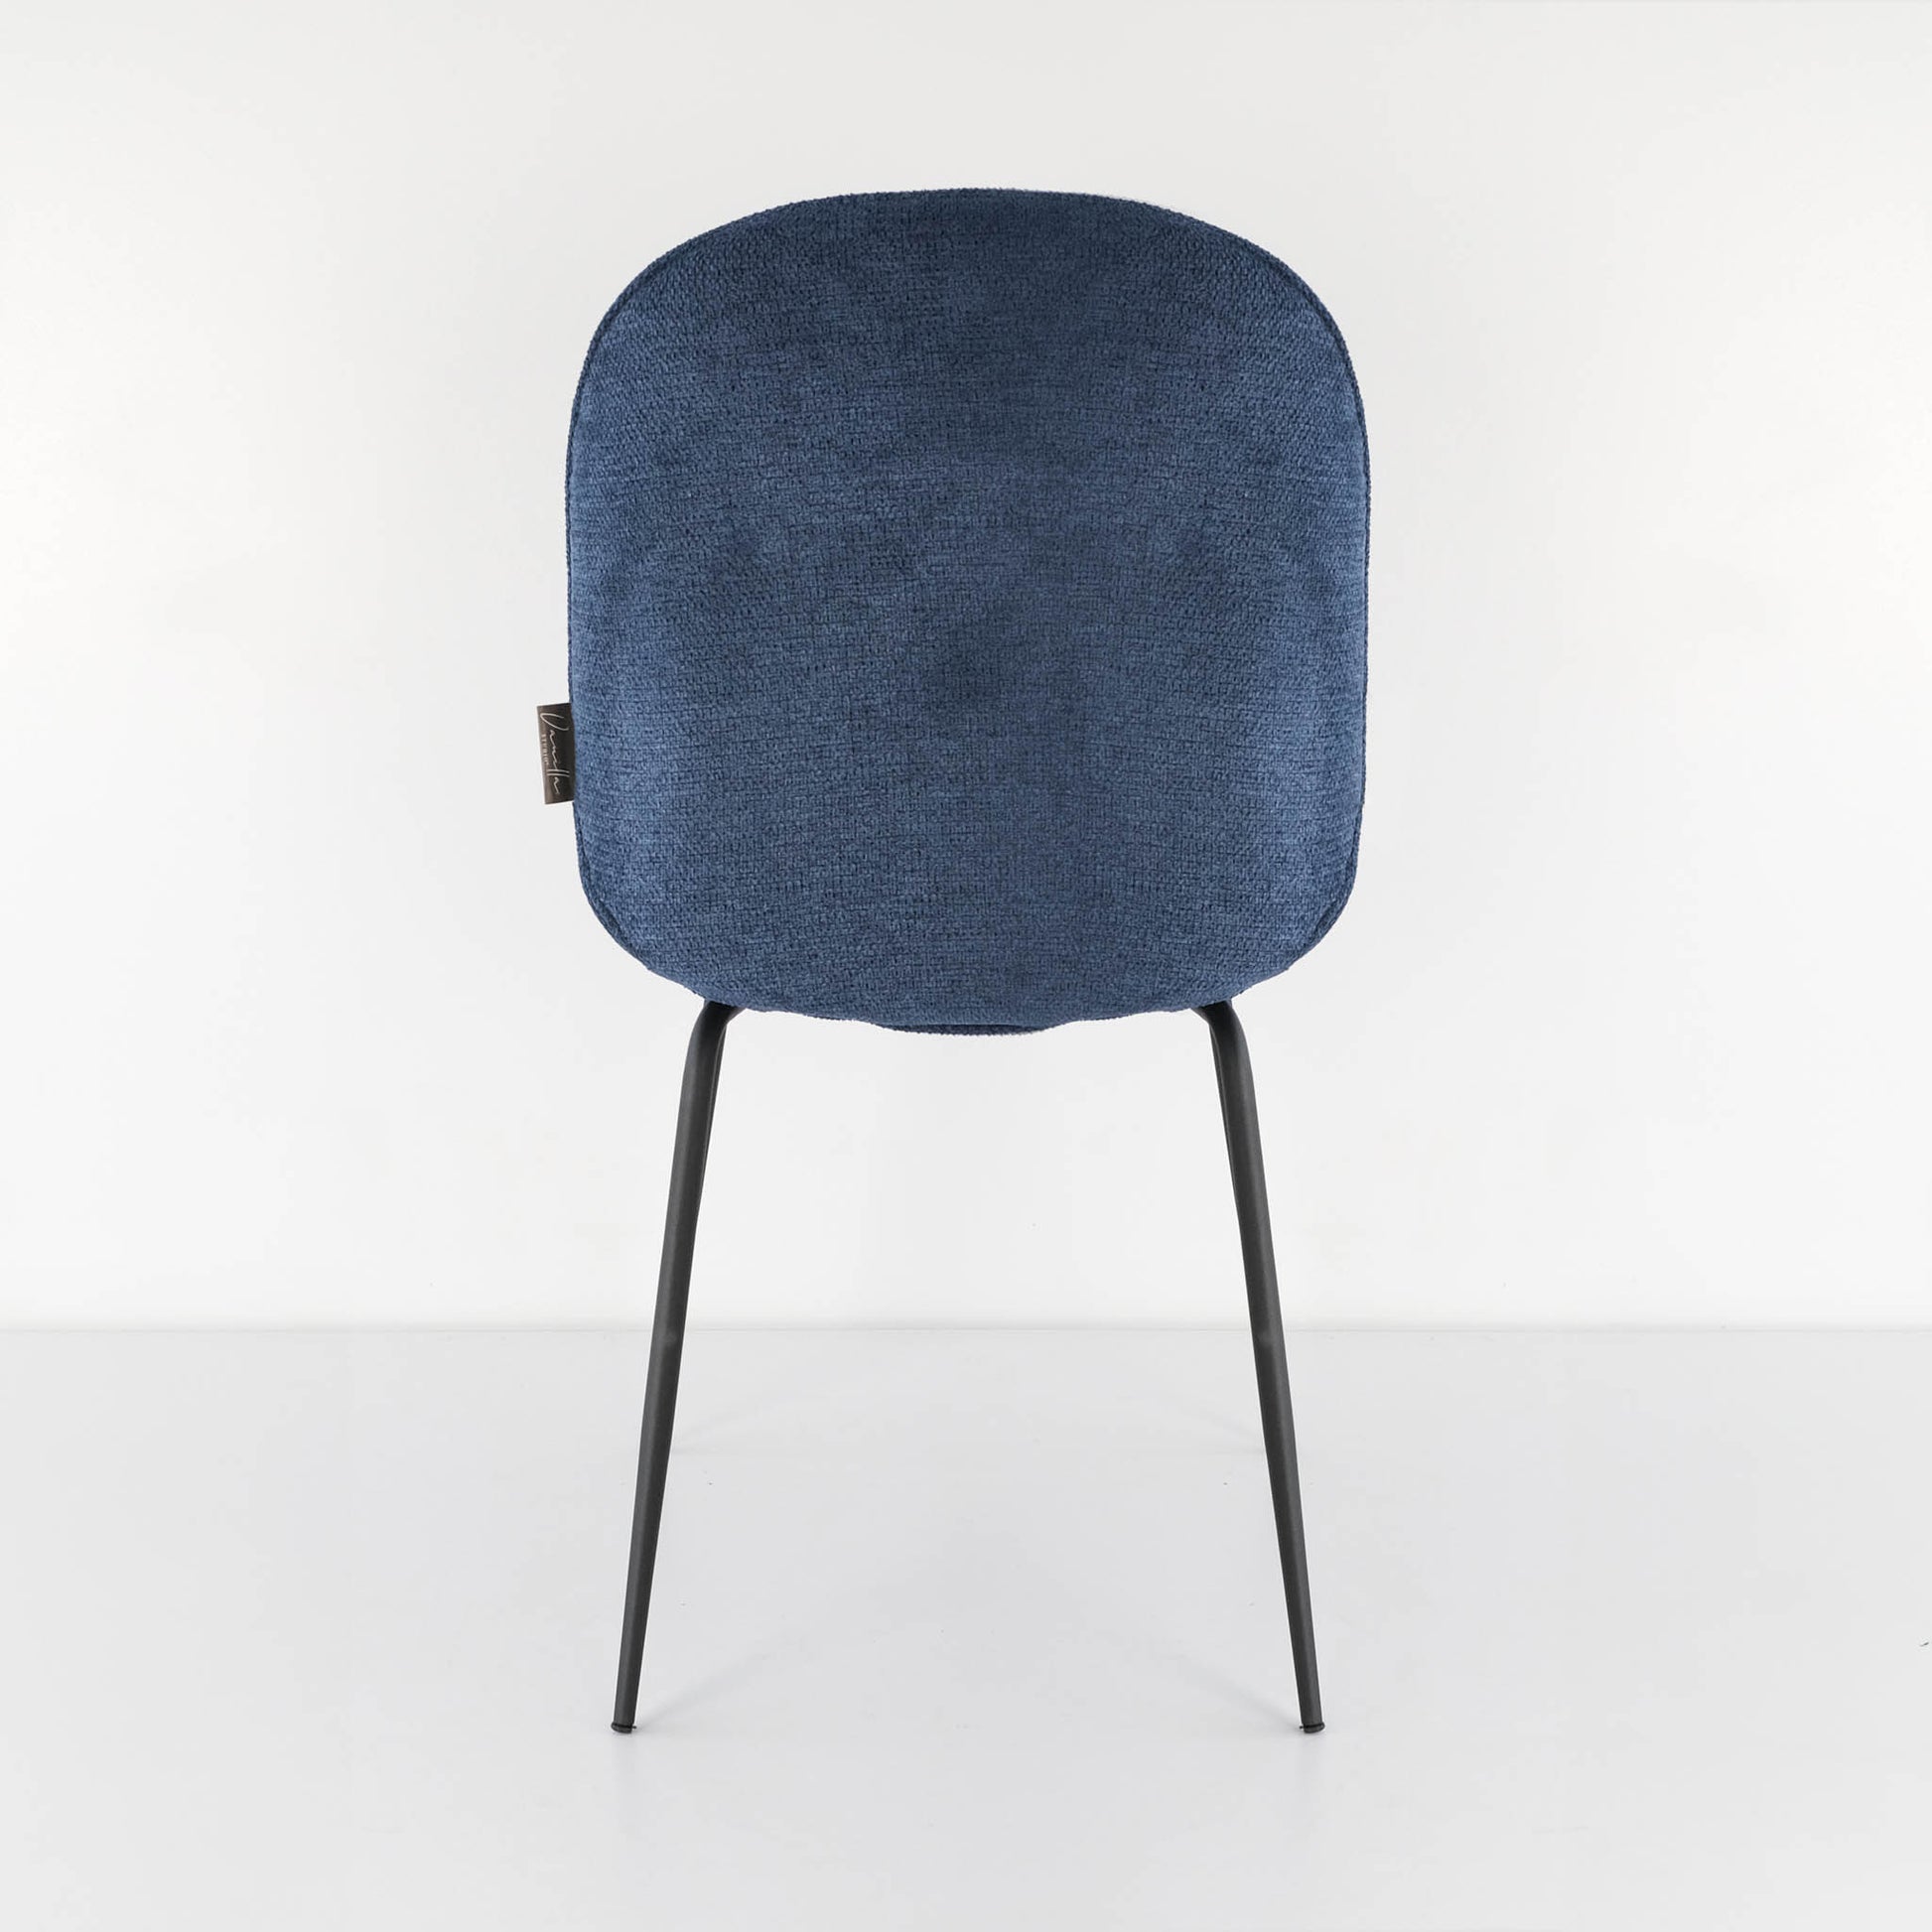 Back view of a vibrant royal blue Beetle dining chair